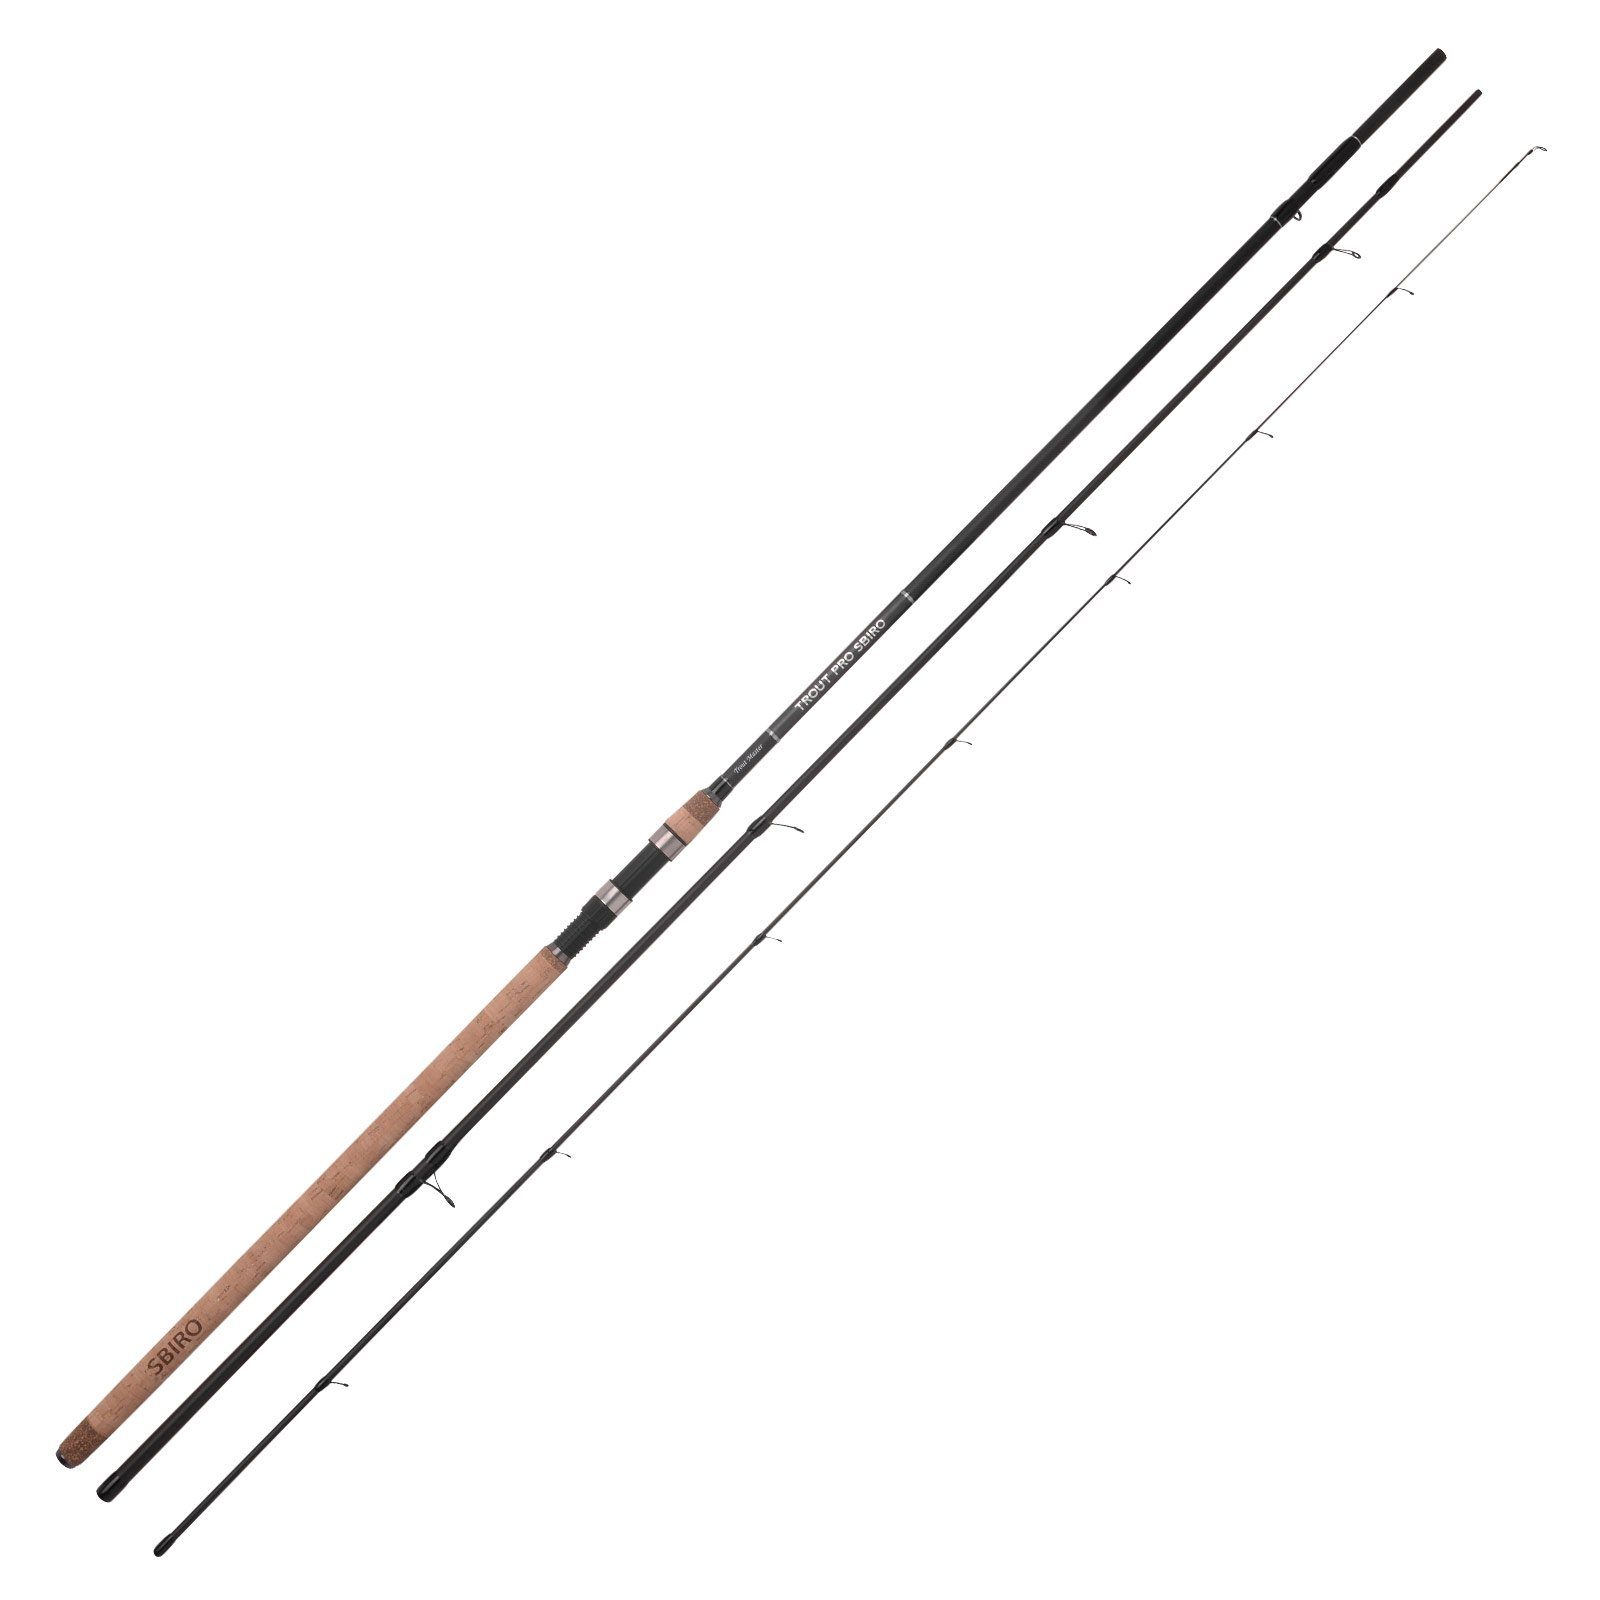 SPRO Forellenrute, (3-tlg), Spro Sbiro 3.00 Forellenrute 40g Master Trout Trout Pro